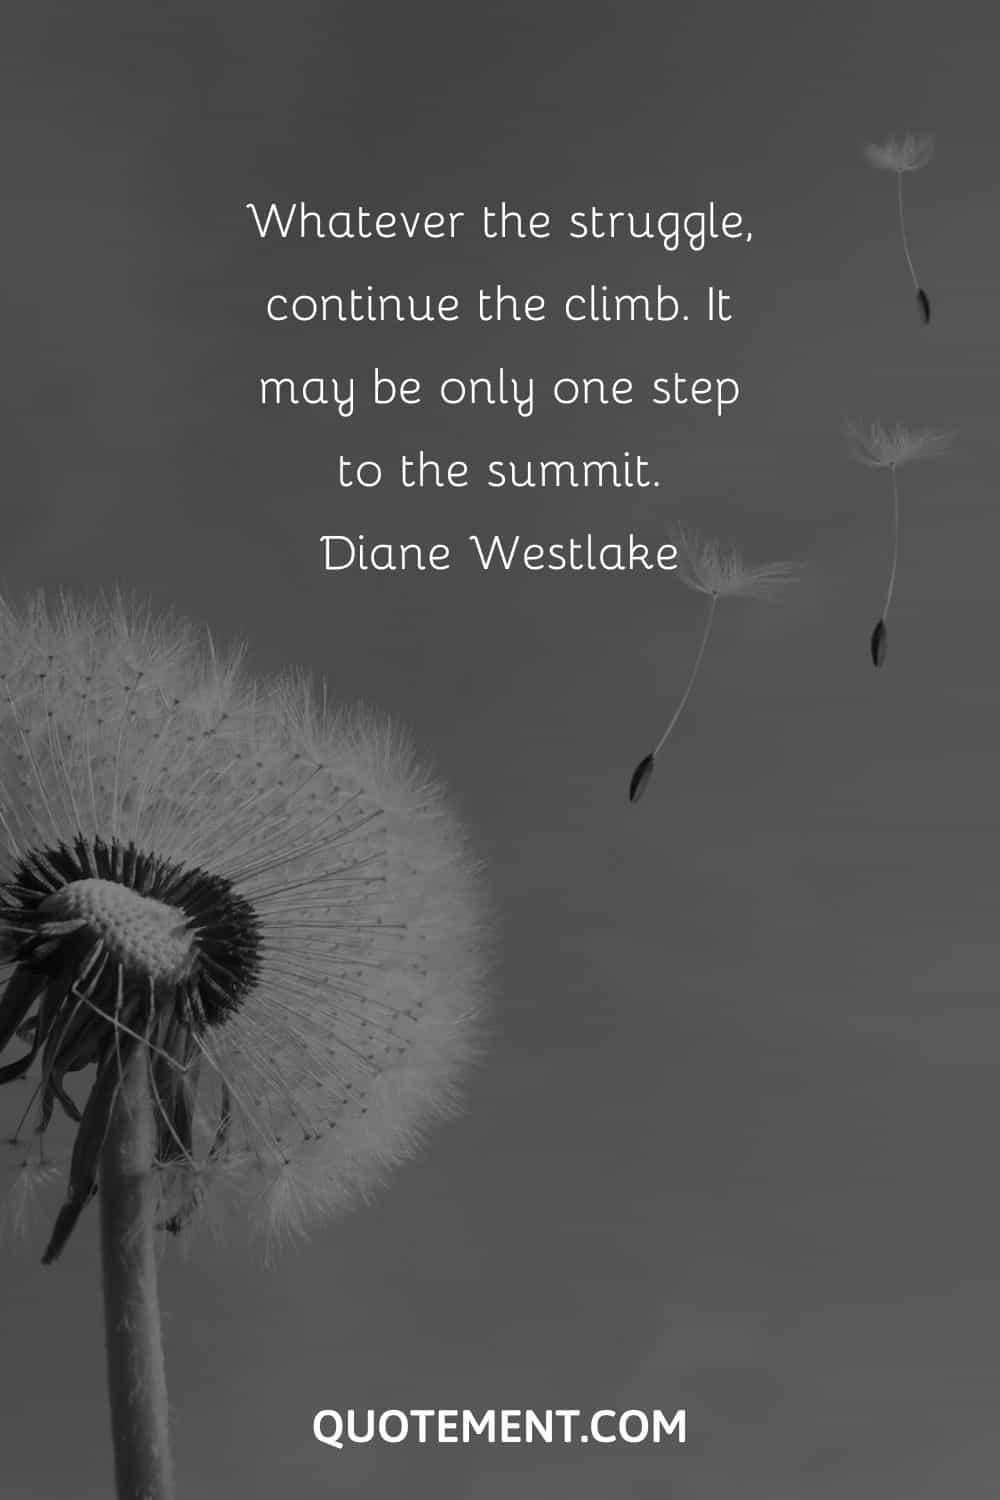 Whatever the struggle, continue the climb. It may be only one step to the summit